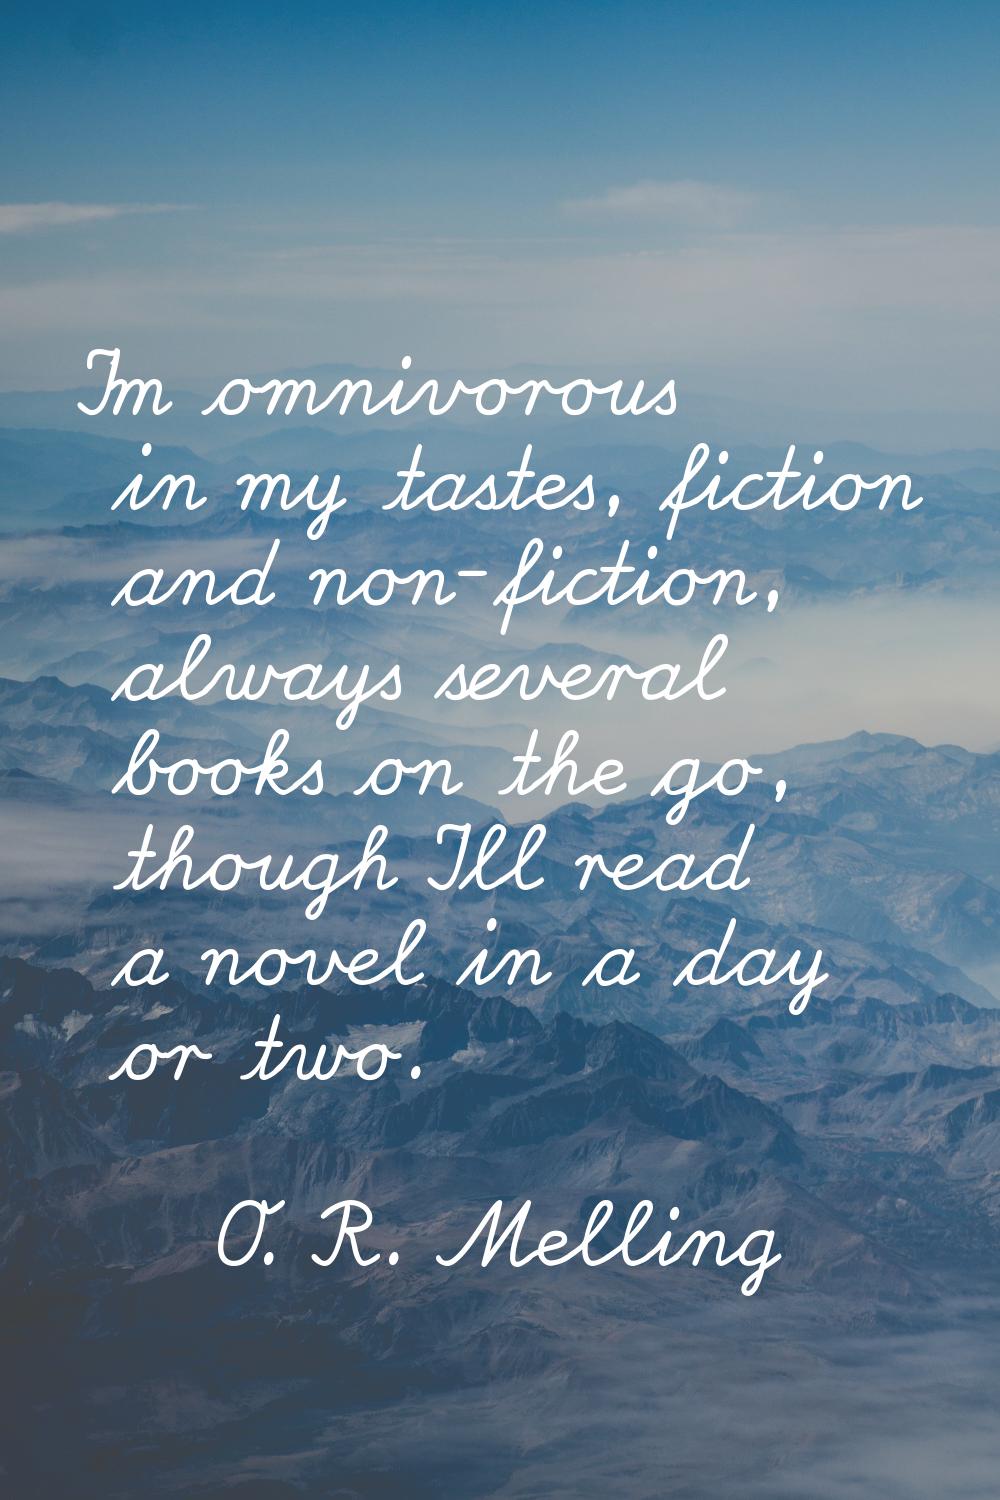 I'm omnivorous in my tastes, fiction and non-fiction, always several books on the go, though I'll r